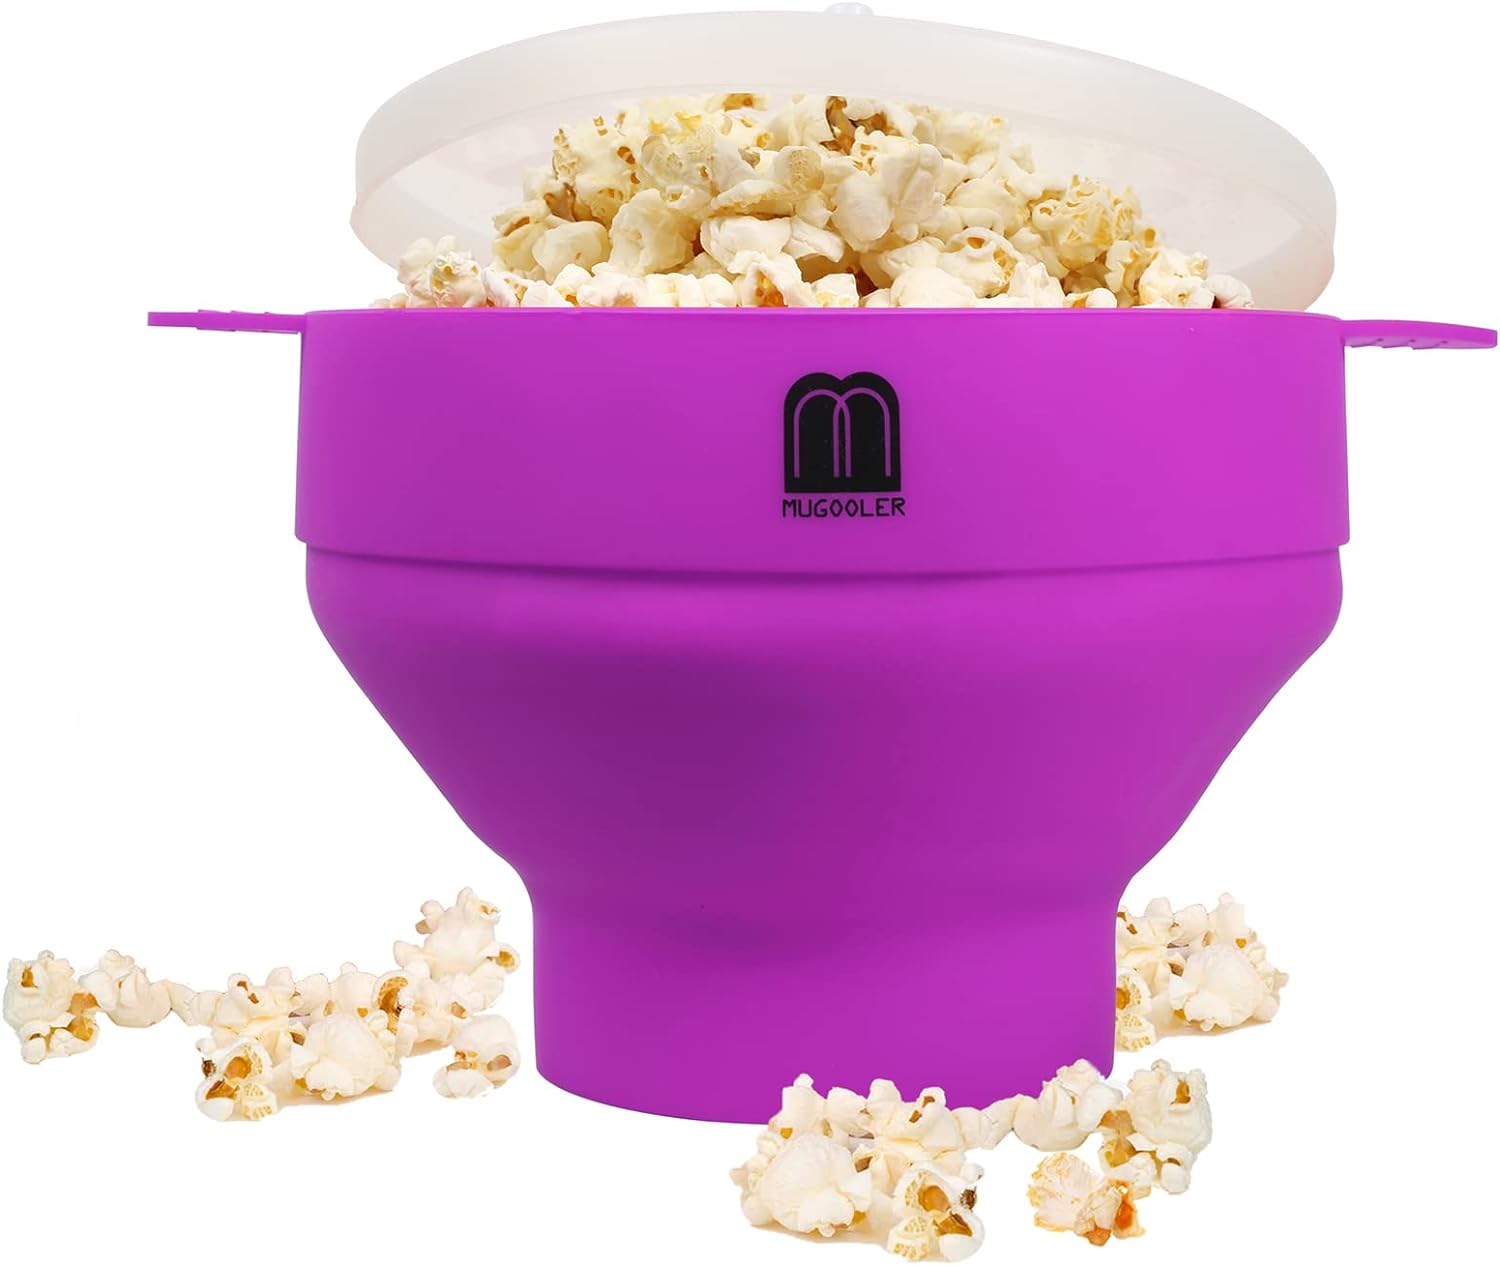 MMUGOOLER Original Microwave Popcorn Popper Silicone Popcorn Maker, Collapsible Bowl with Lid BPA Free and Dishwasher Safe, Quick & Easy(Purple)